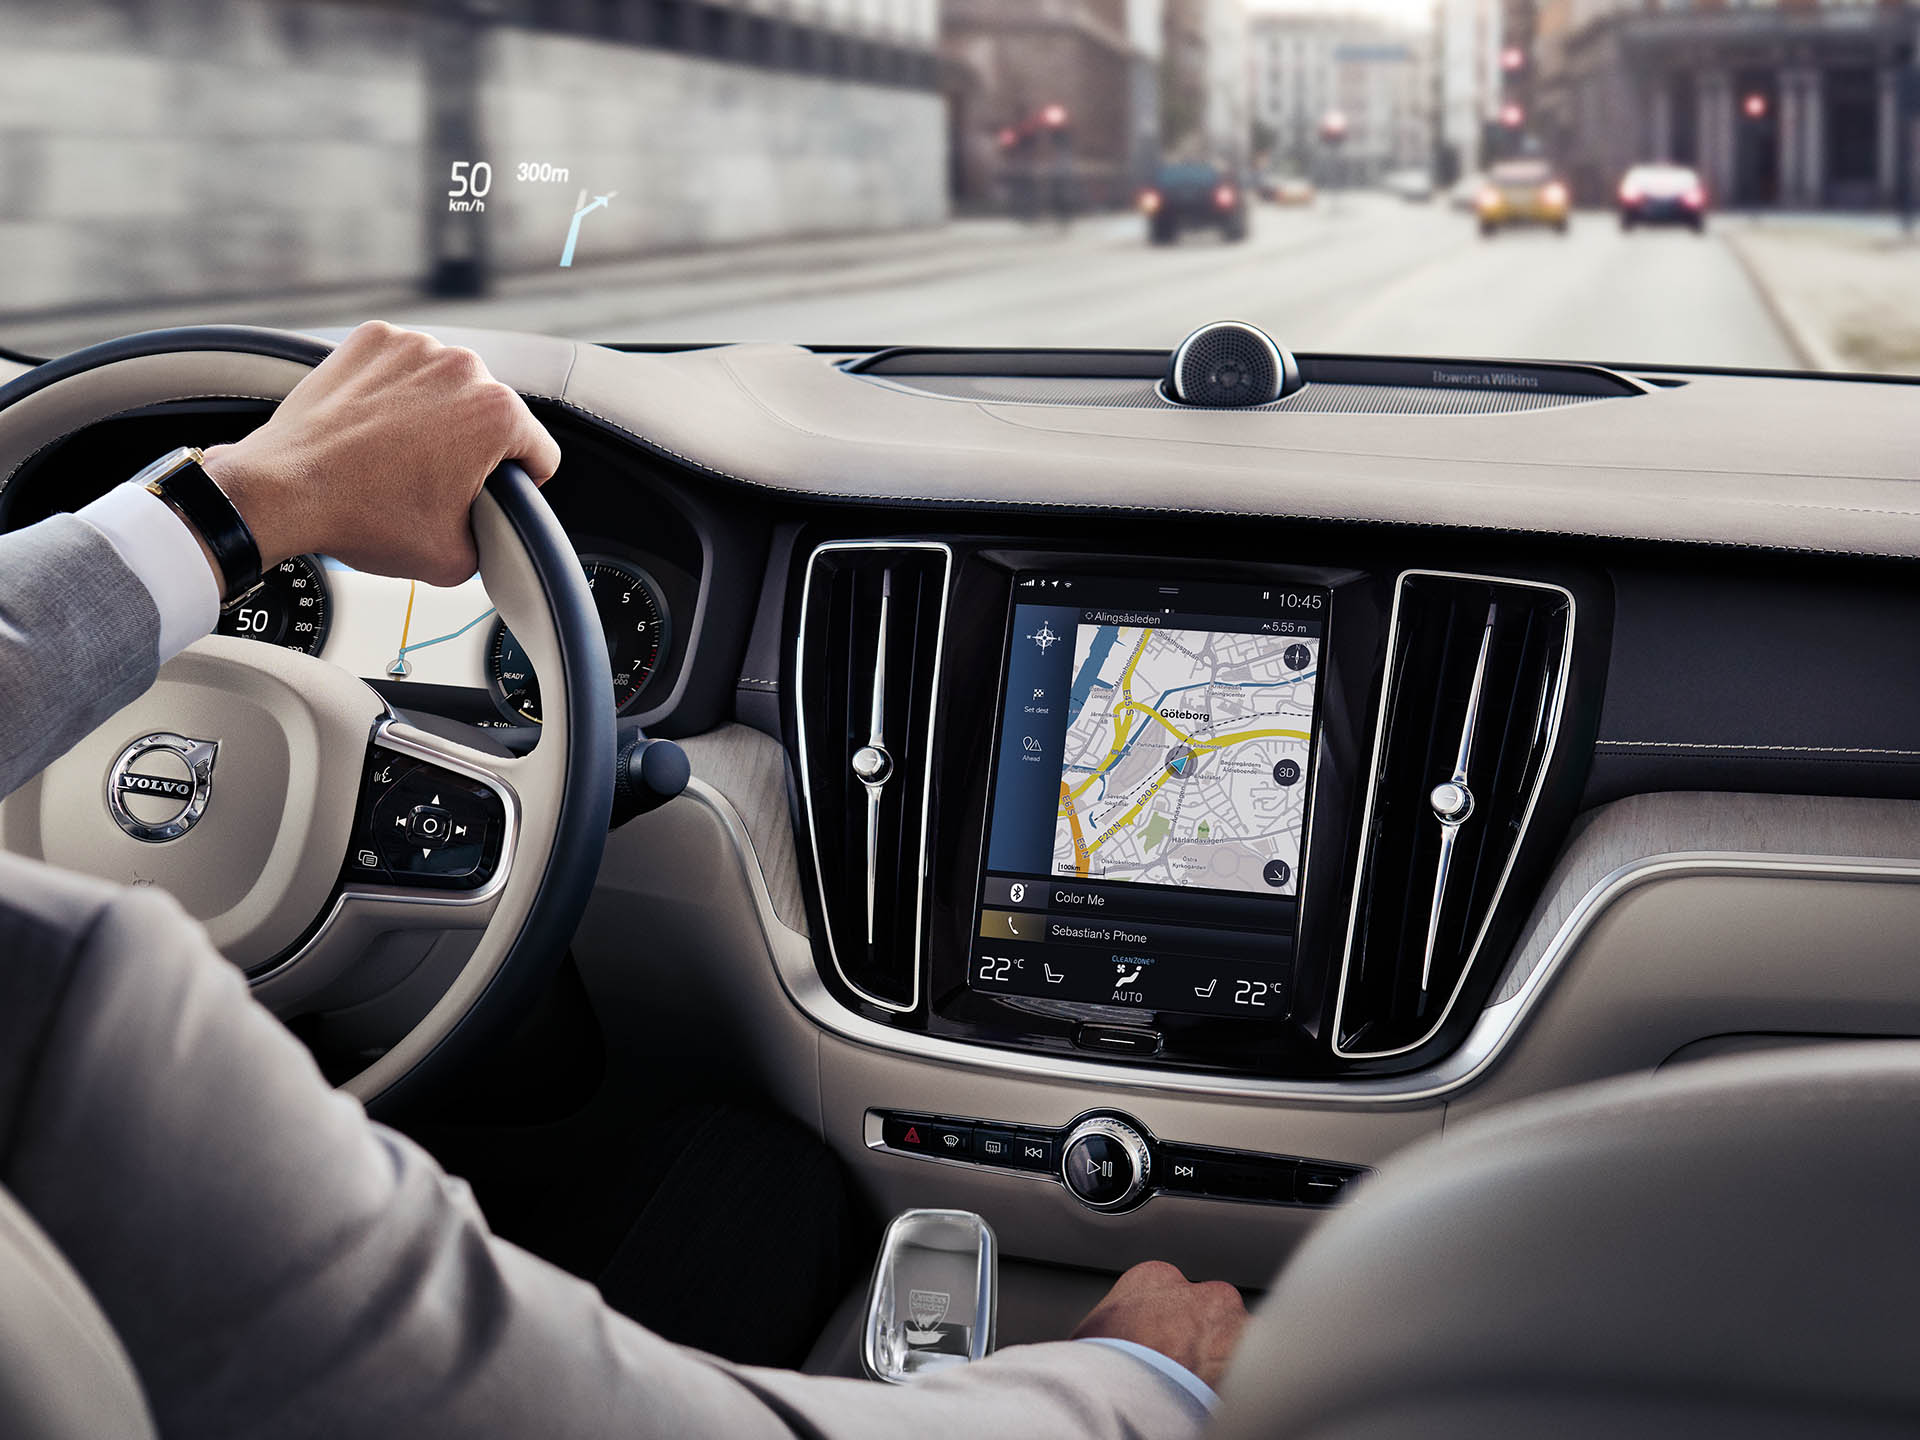 Inside a Volvo Sedan, a man driving on the road with help of navigation system